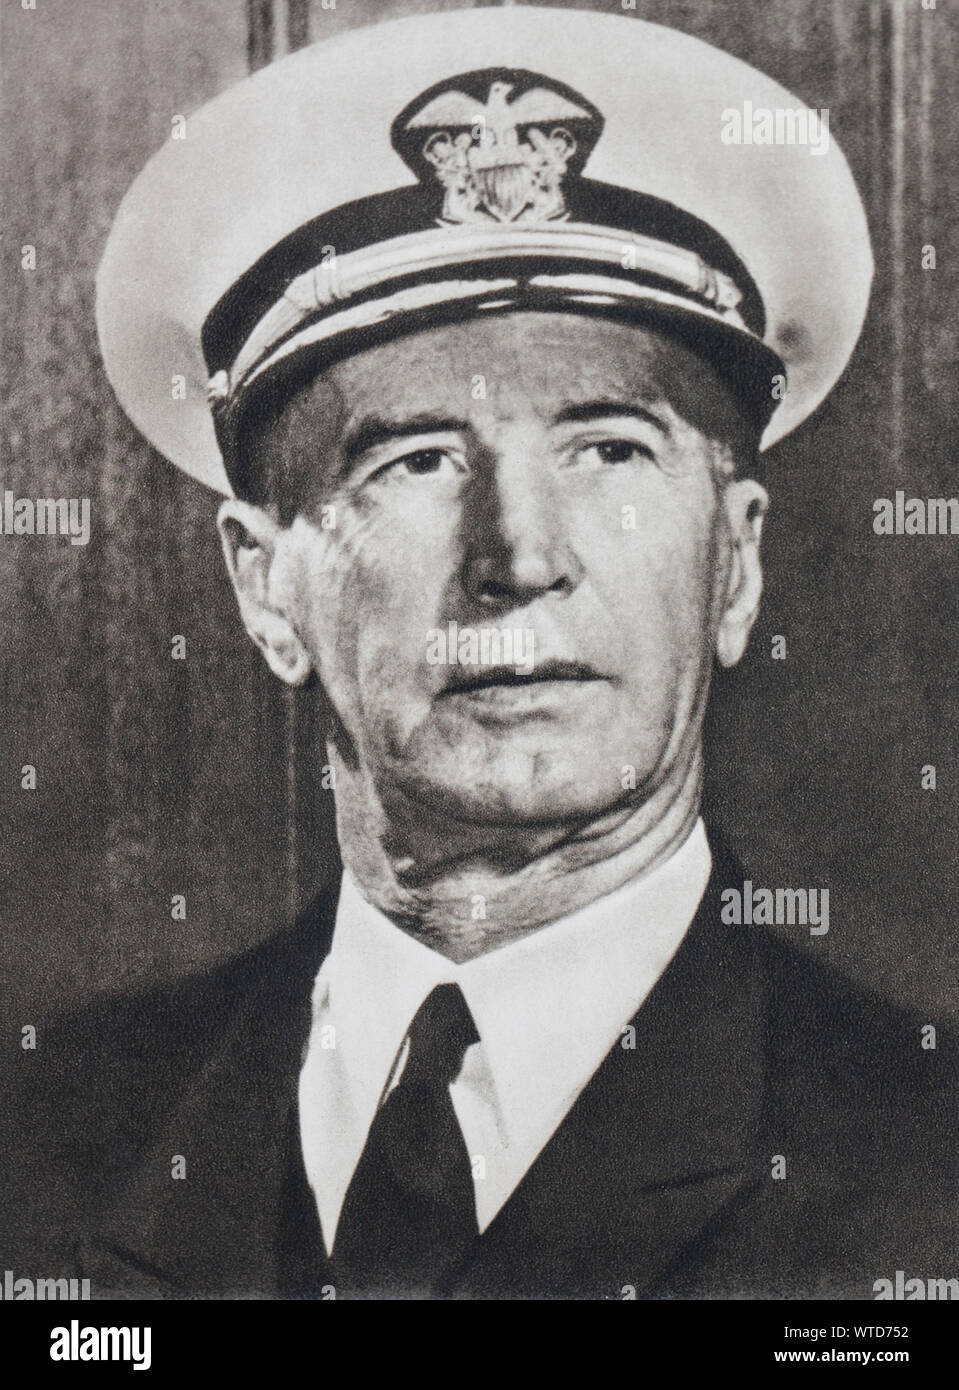 Admiral Ernest King (1878 – 1956) was Commander in Chief, United States Fleet (COMINCH) and Chief of Naval Operations (CNO) during World War II. Stock Photo